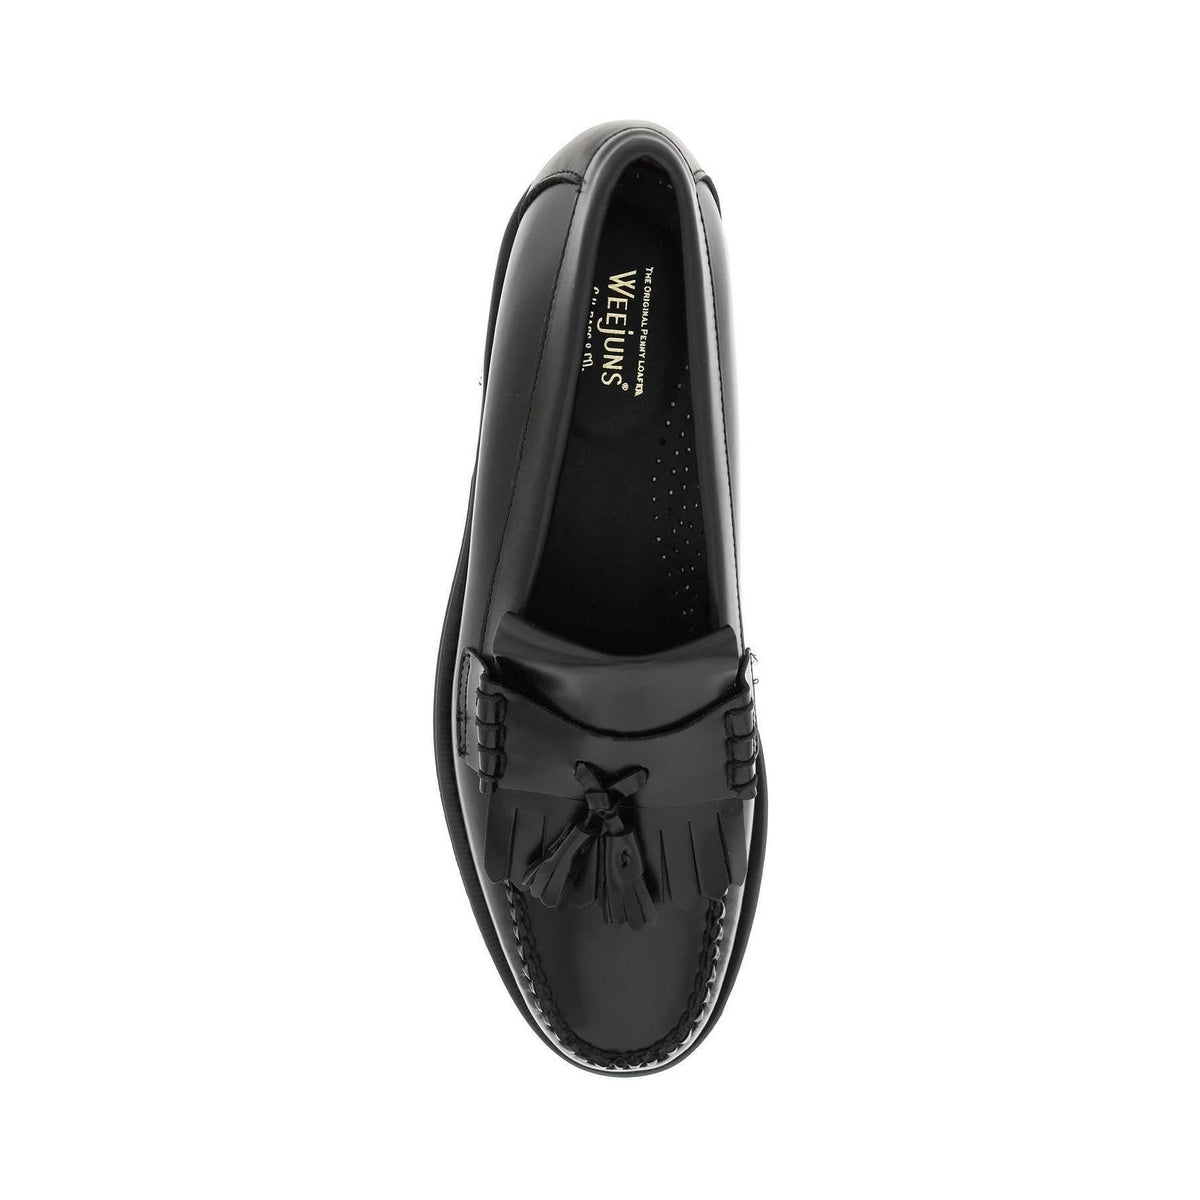 G.H. BASS - Black Leather Esther Kiltie Weejuns Loafers With Tassels - JOHN JULIA